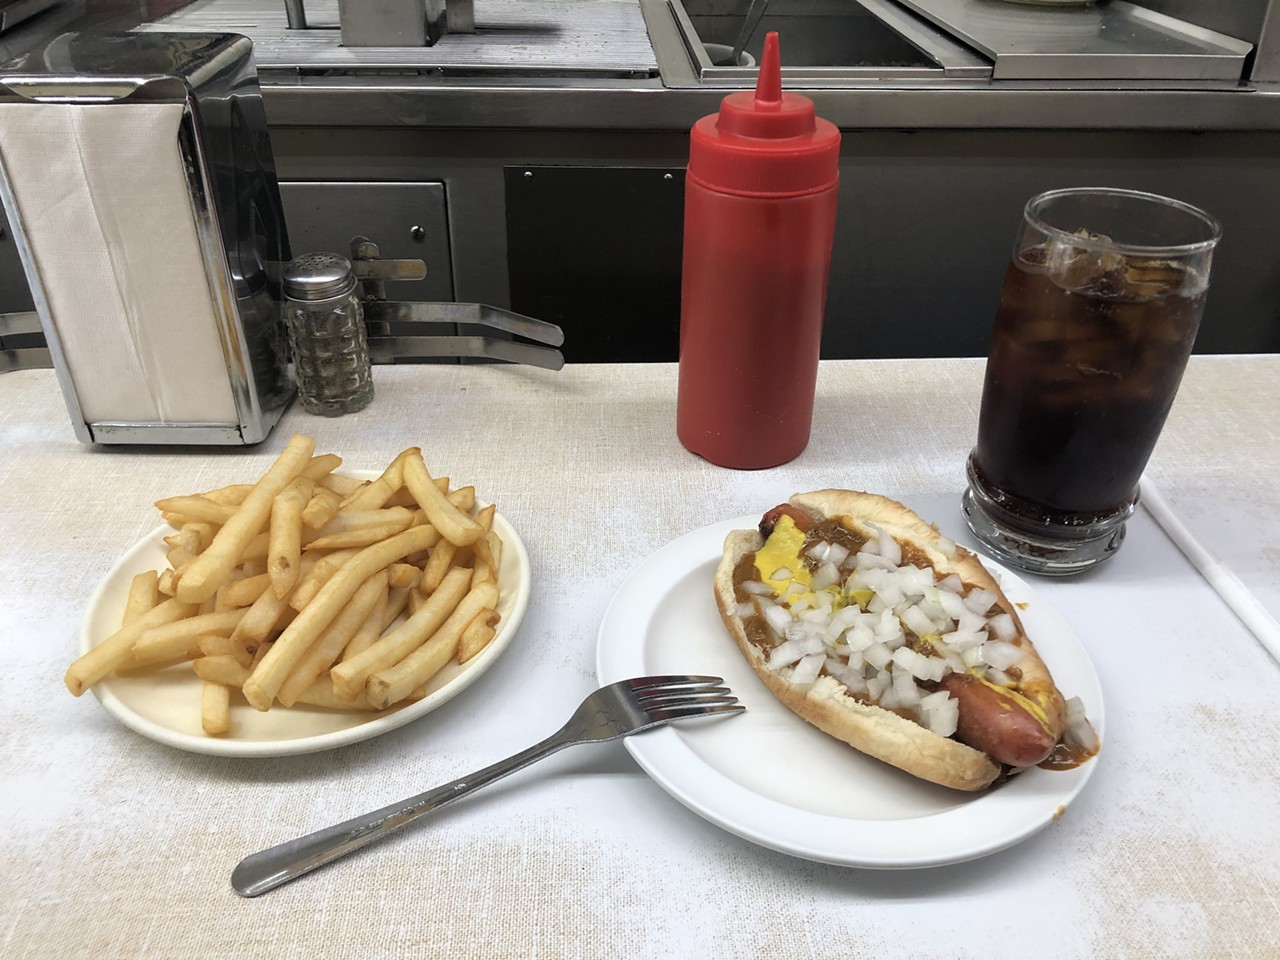 Ask for ketchup on your coneys. —@lifeofdurf